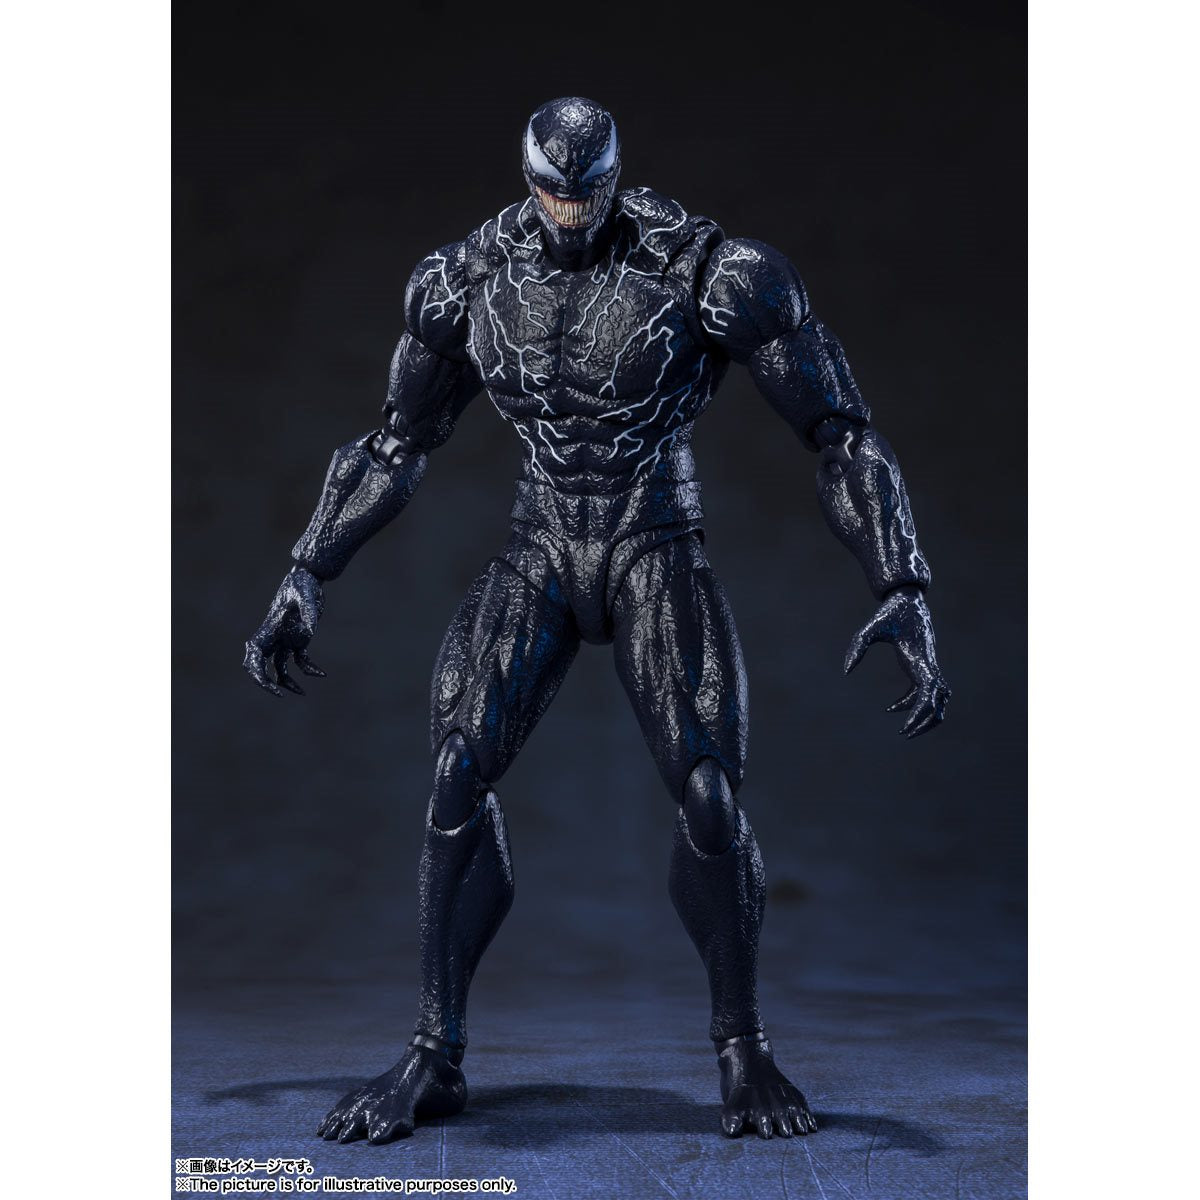 A detailed S.H.Figuarts Venom action figure standing 7.5 inches tall, with optional parts including three alternate head sculpts, two pairs of interchangeable hands, and two back tentacles. A bonus Venom symbiote head and pedestal are also displayed.